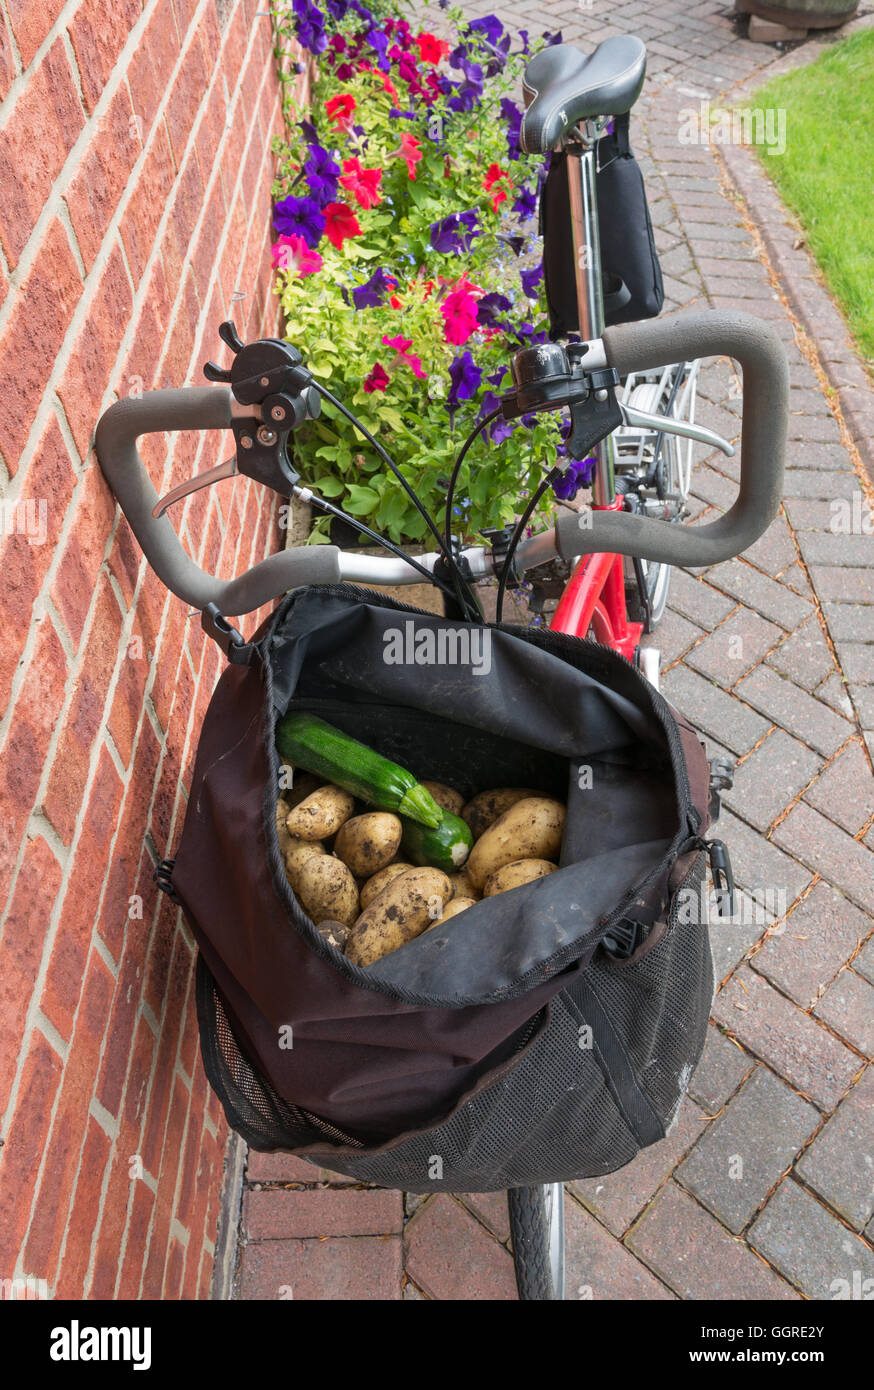 Garden produce carried in the bag of a Brompton bicycle, England, UK Stock Photo